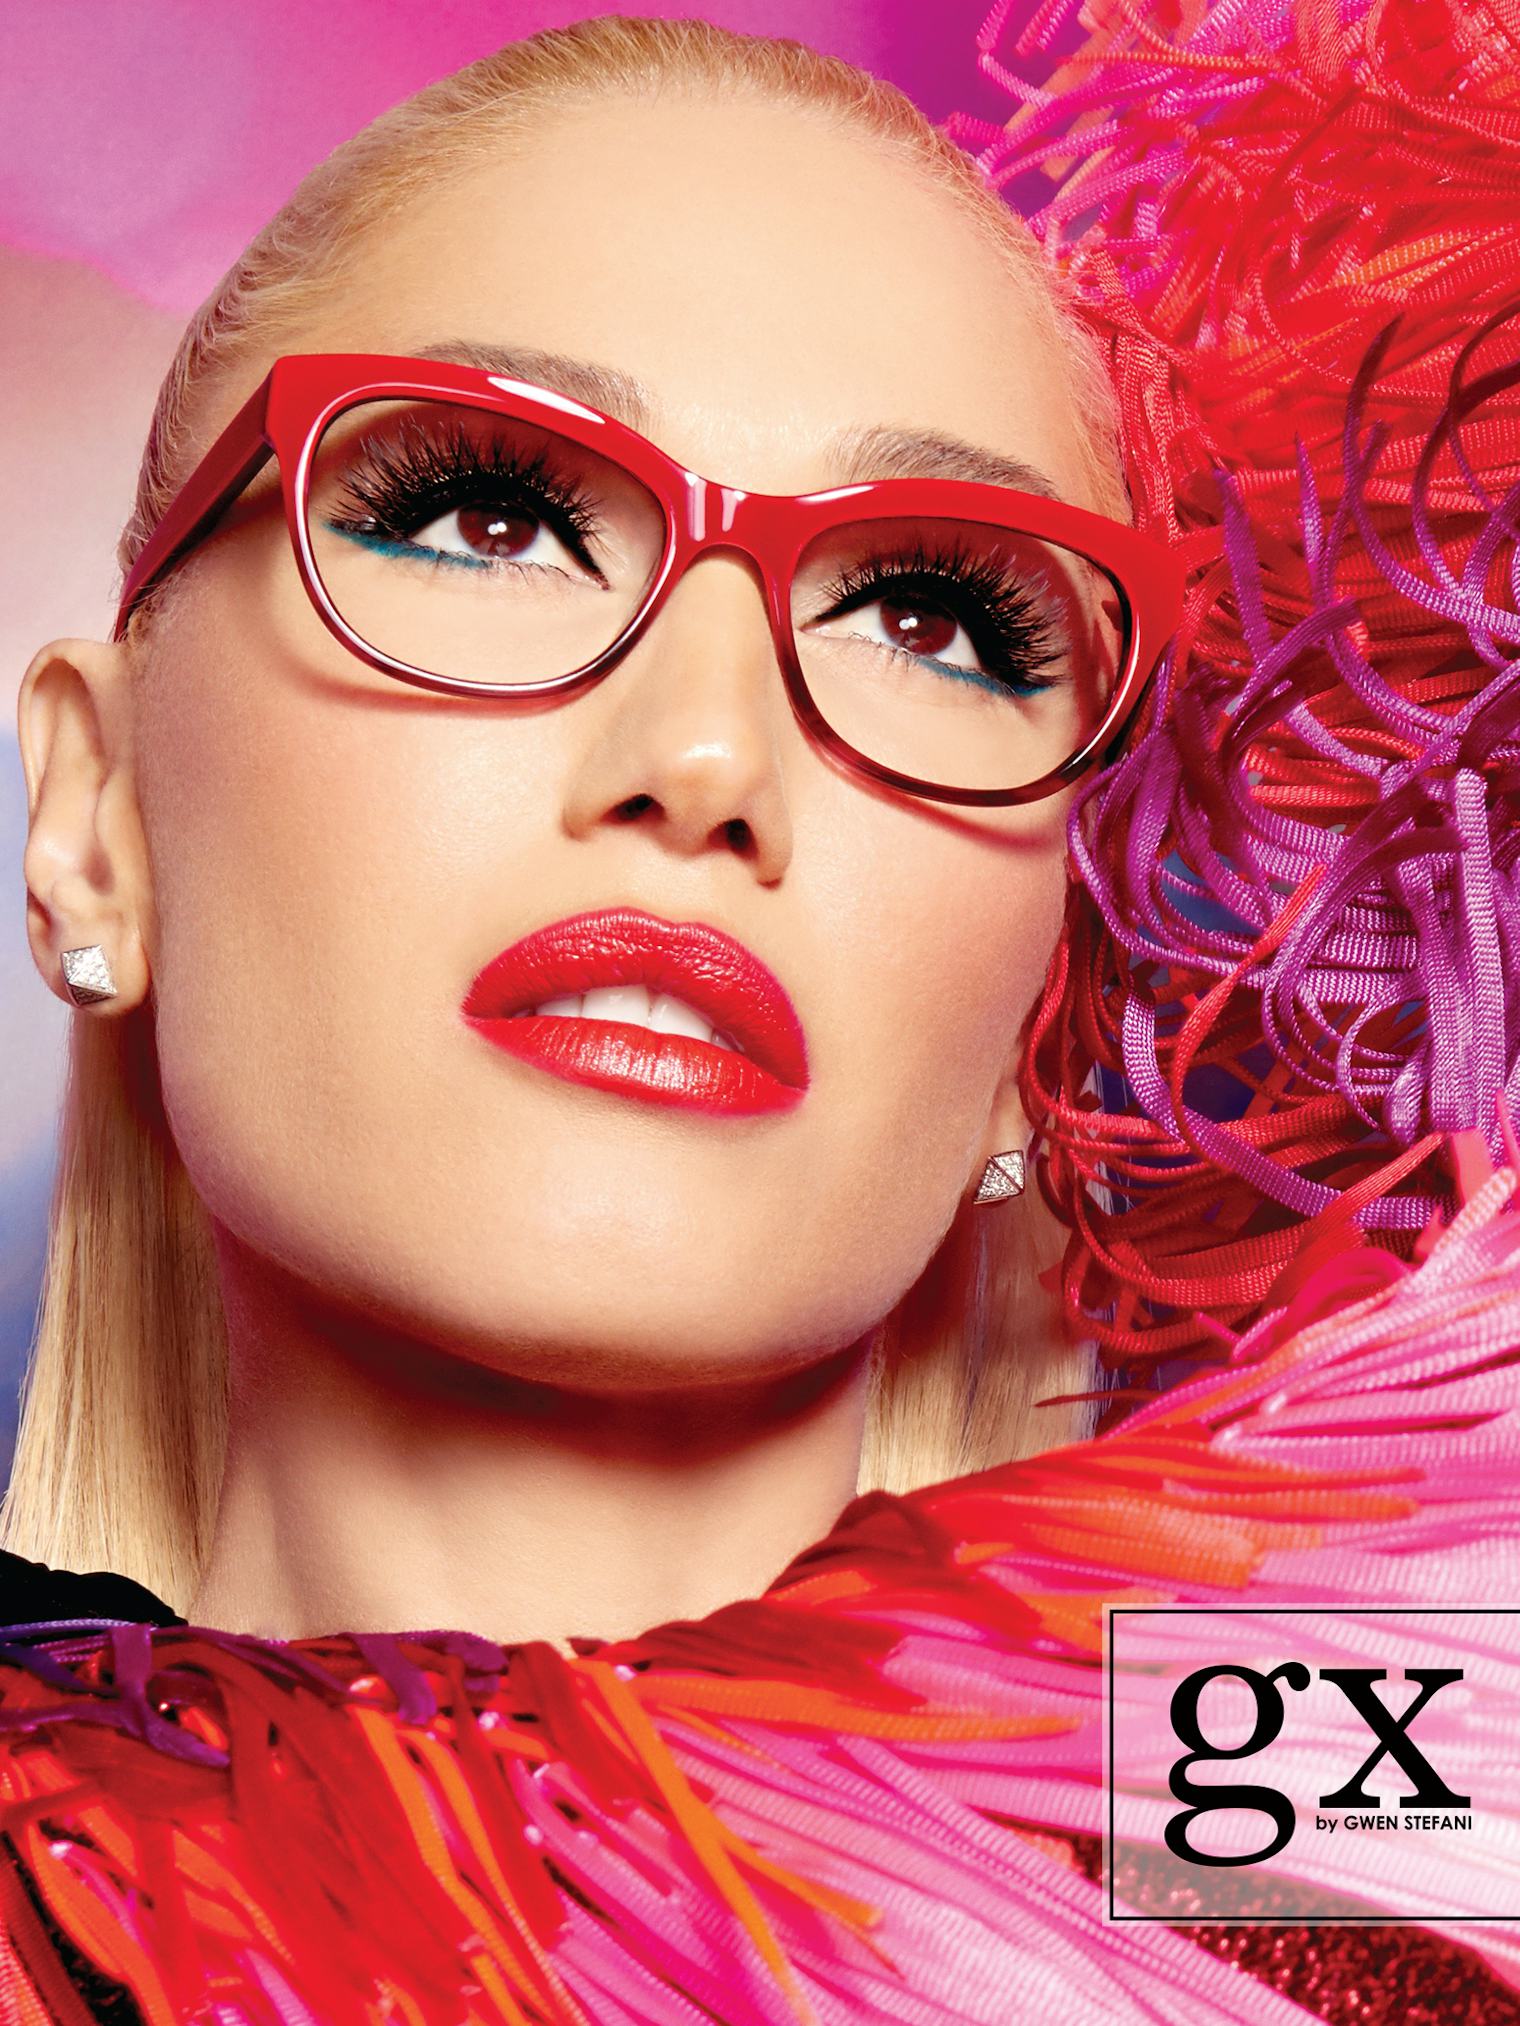 Gwen Stefani's Eyewear Collection Is Inspired By The Glasses She's